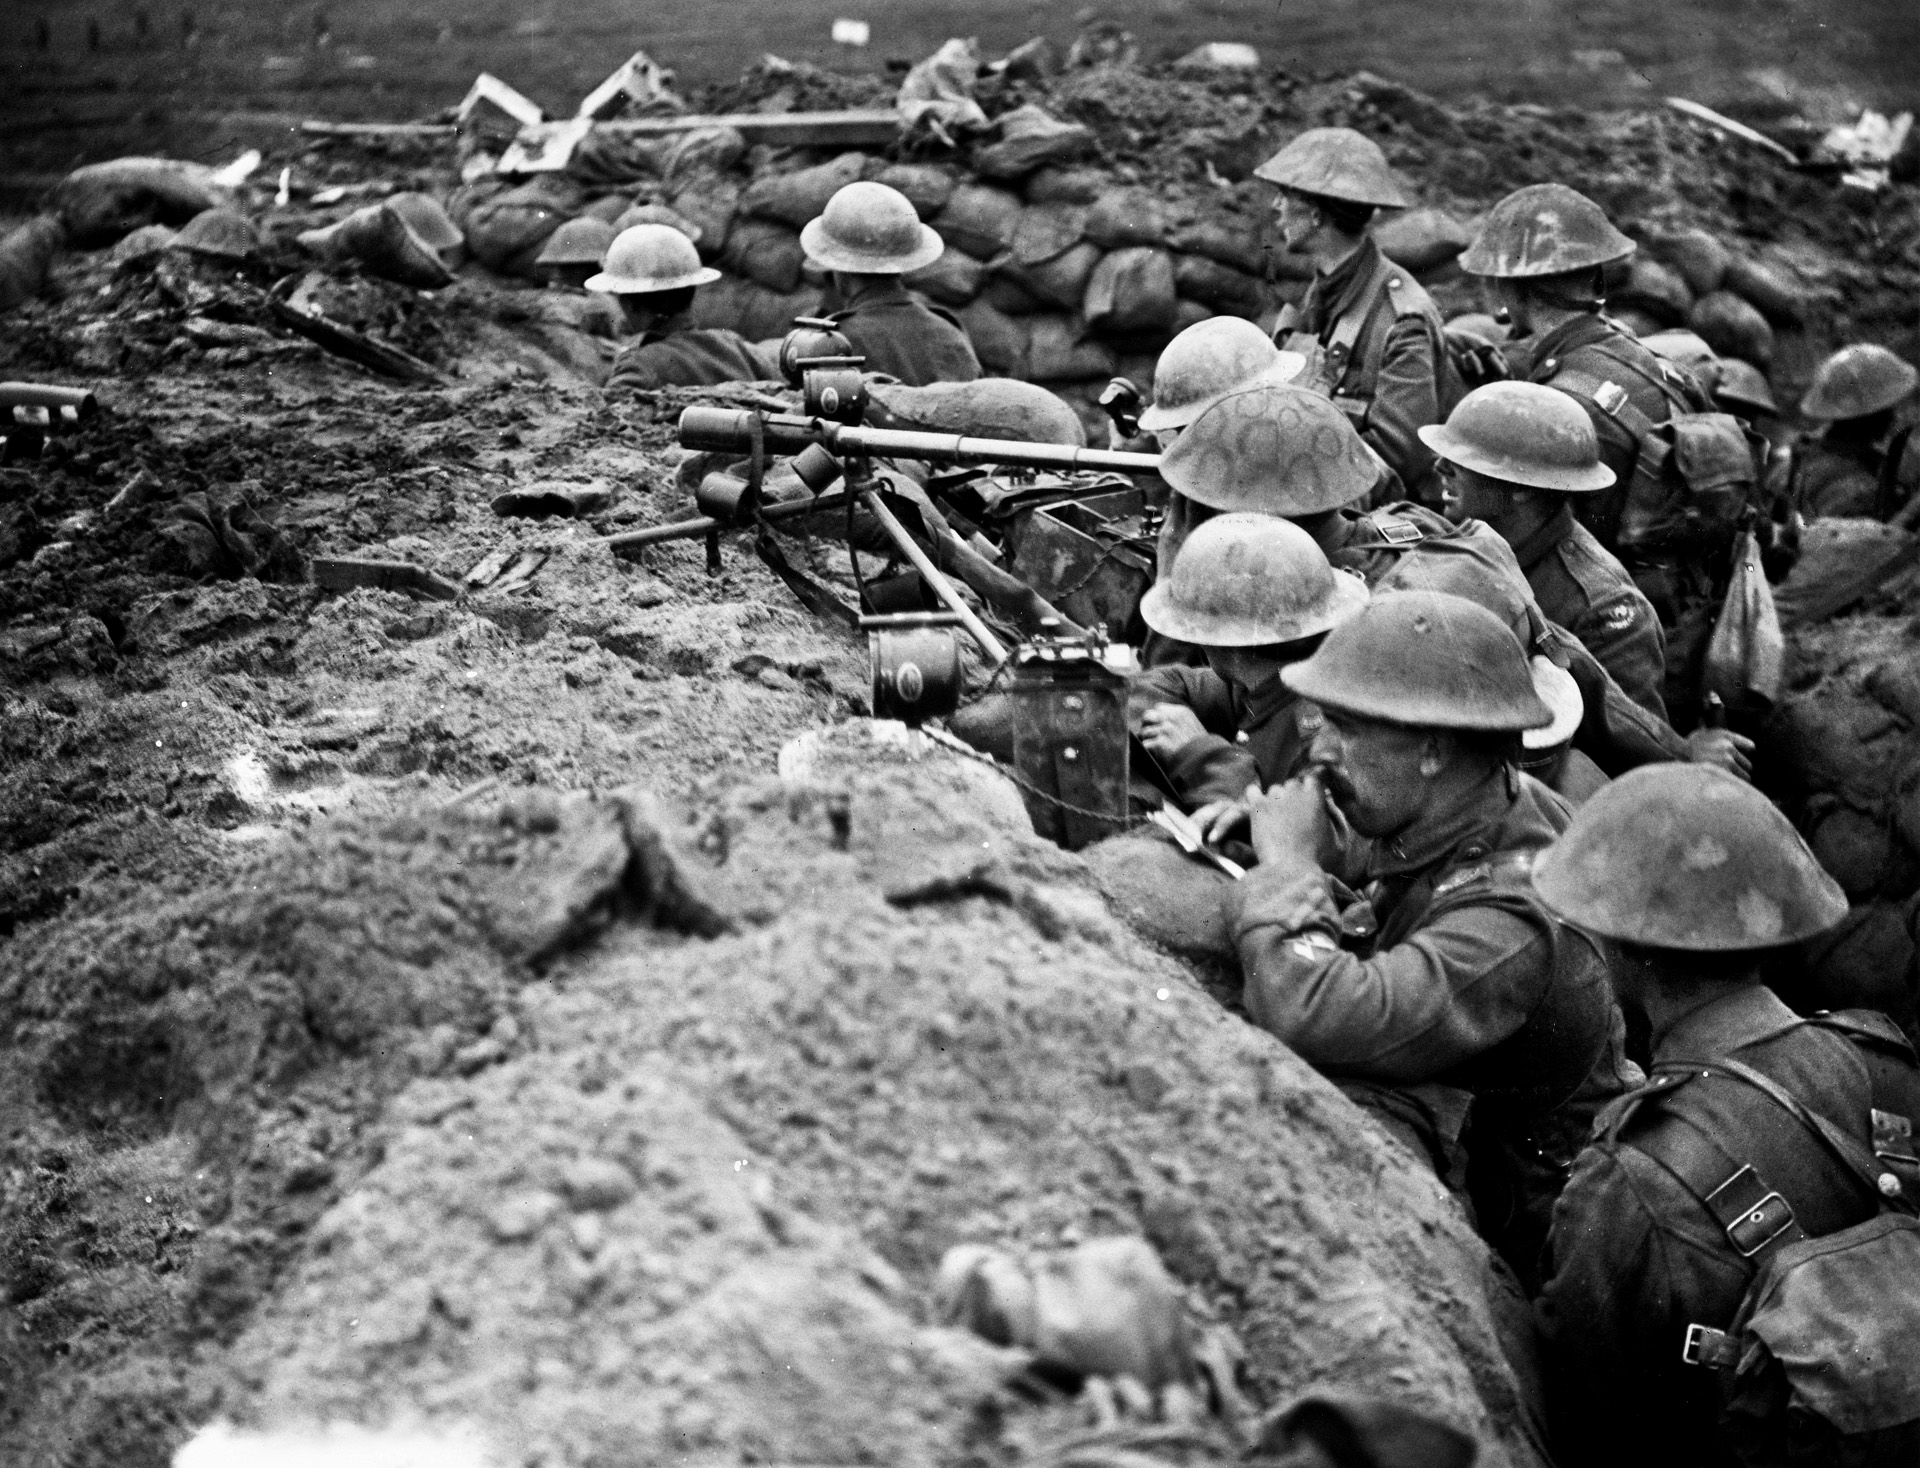 British infantry prepares to assault German positions on Menin Road Ridge. The British squandered valuable time preparing for the Passchendaele offensive, giving the Germans ample time to improve their defenses.